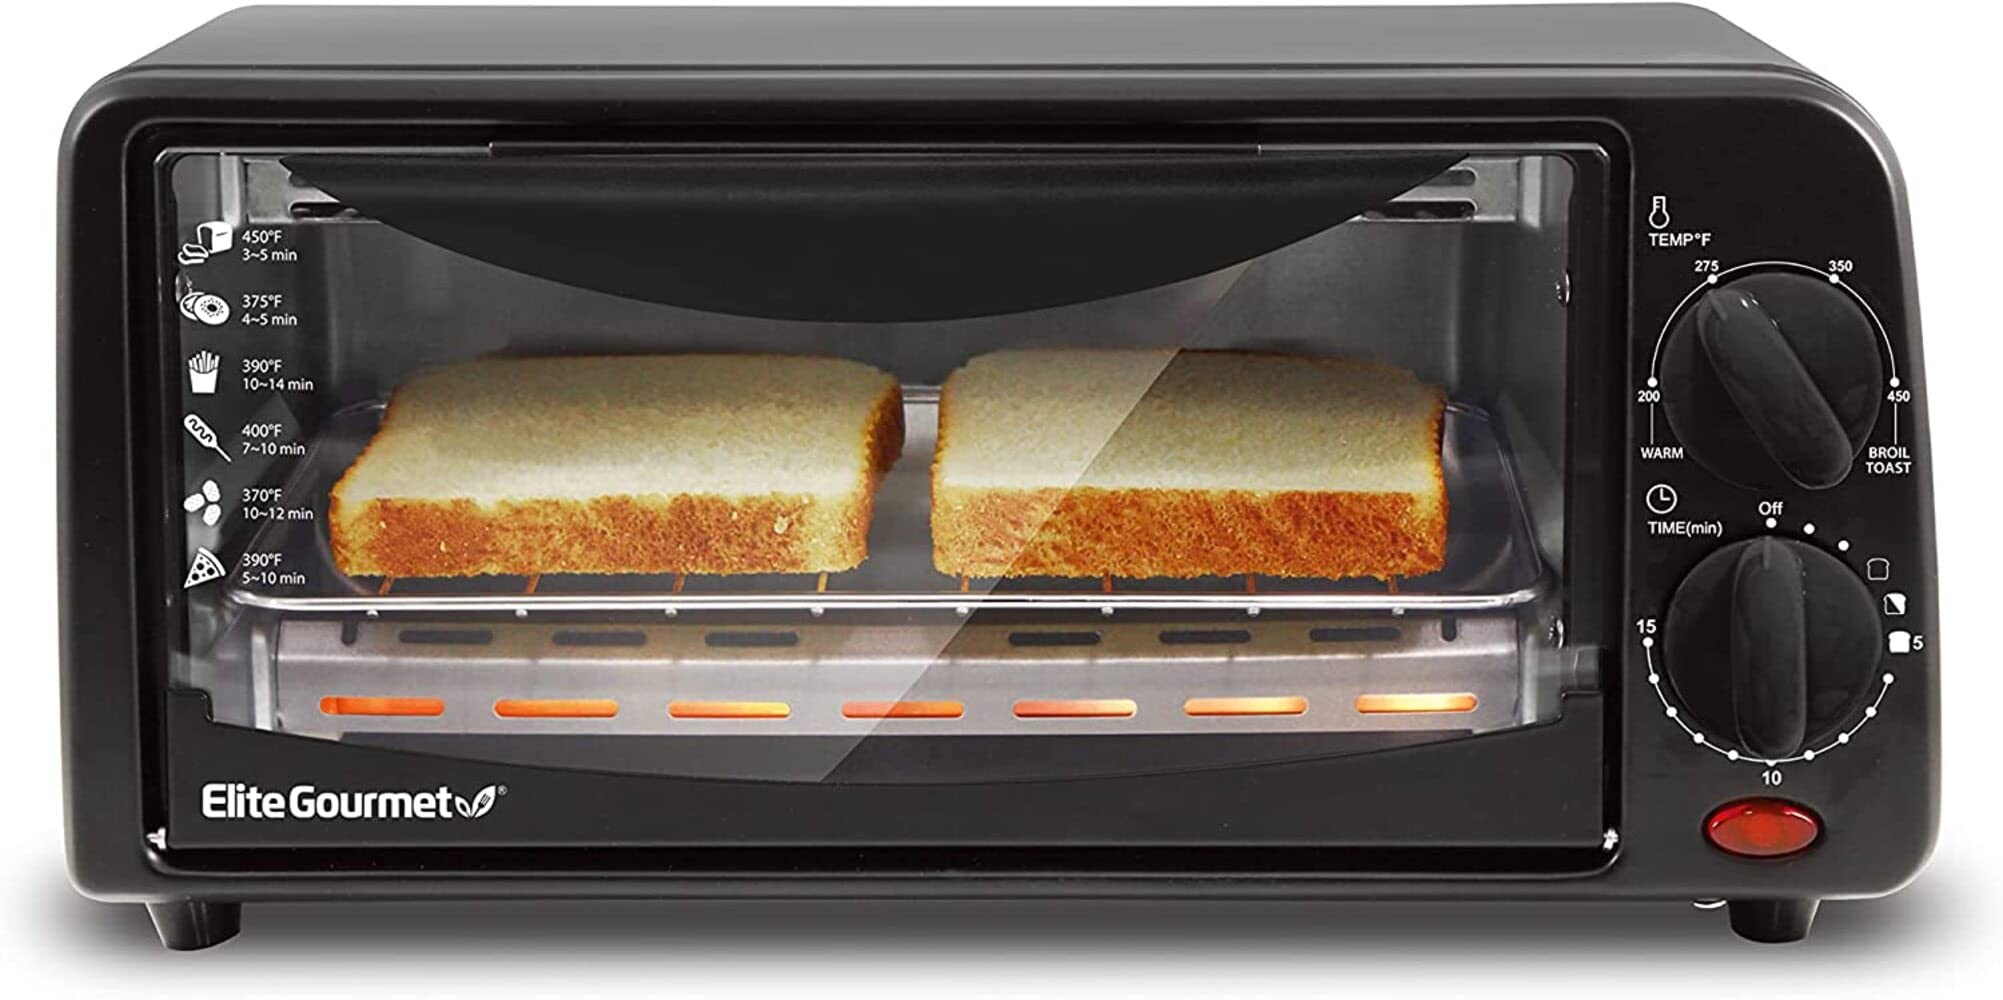 Elite Gourmet Countertop XL Toaster Oven w/ Top Grill & Griddle & Lid + Convection Rotisserie, Bake, Broil, Roast, Toast, Keep Warm & Steam